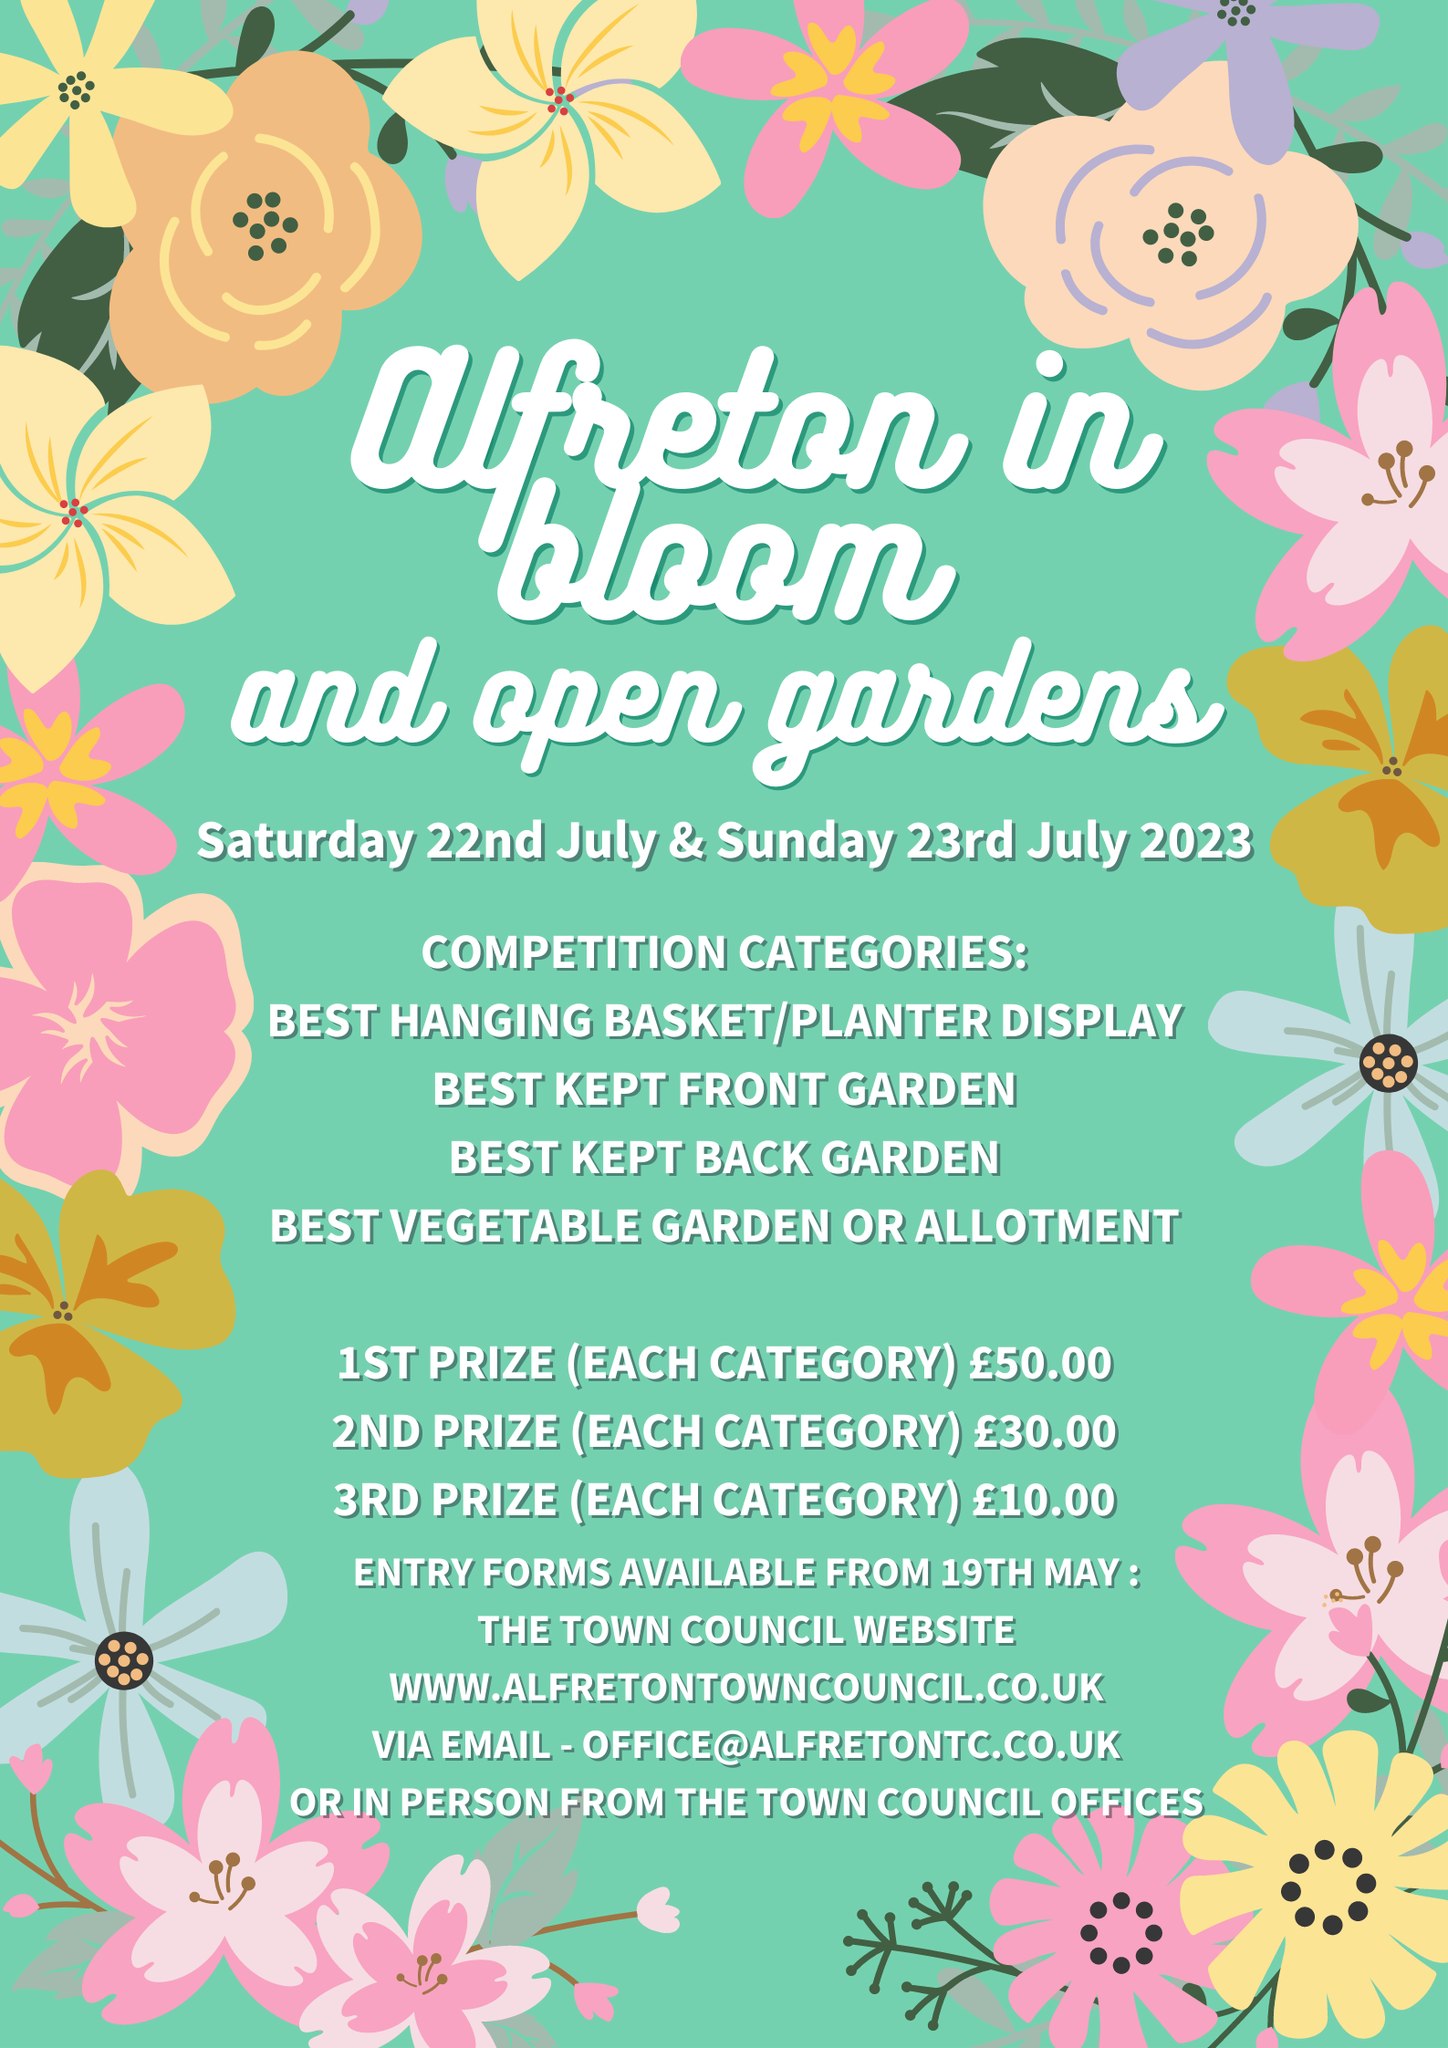 Alfreton in Bloom competition to celebrate town's allotments and gardens